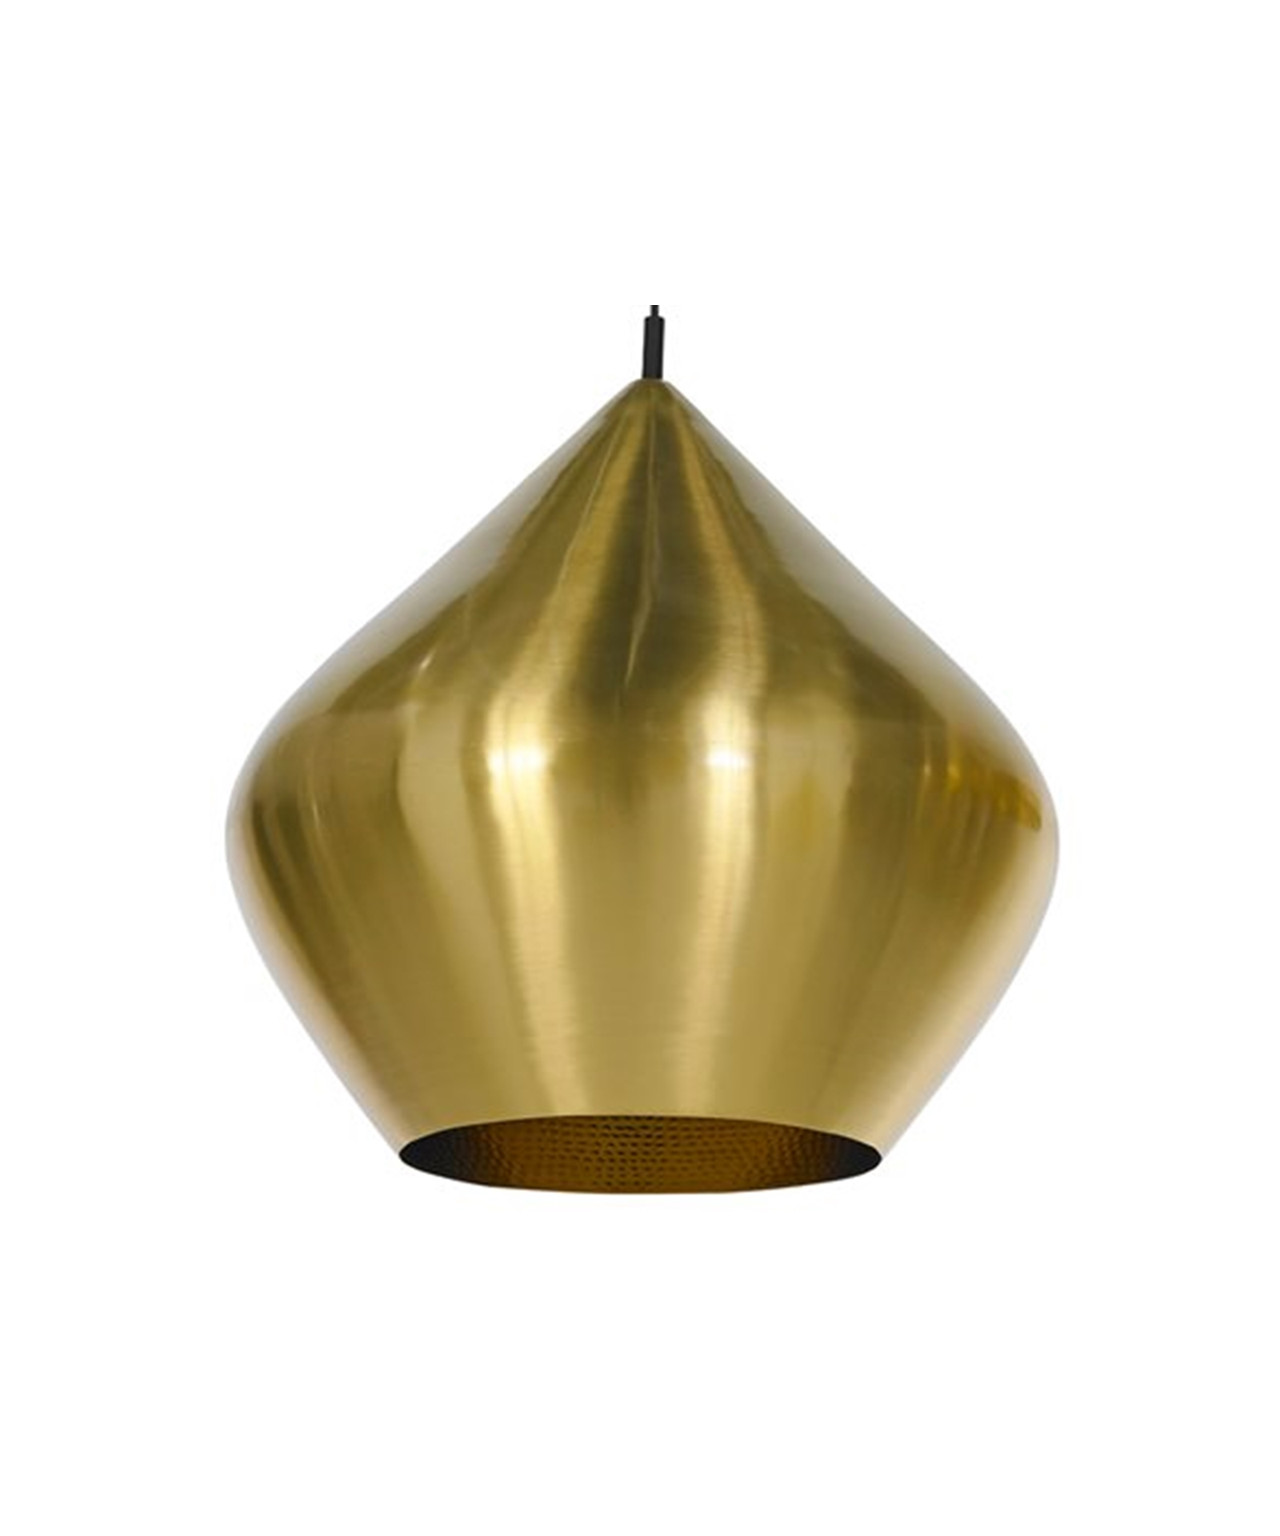 Image of Beat Light Stout LED Pendelleuchte Messing - Tom Dixon bei Lampenmeister.ch